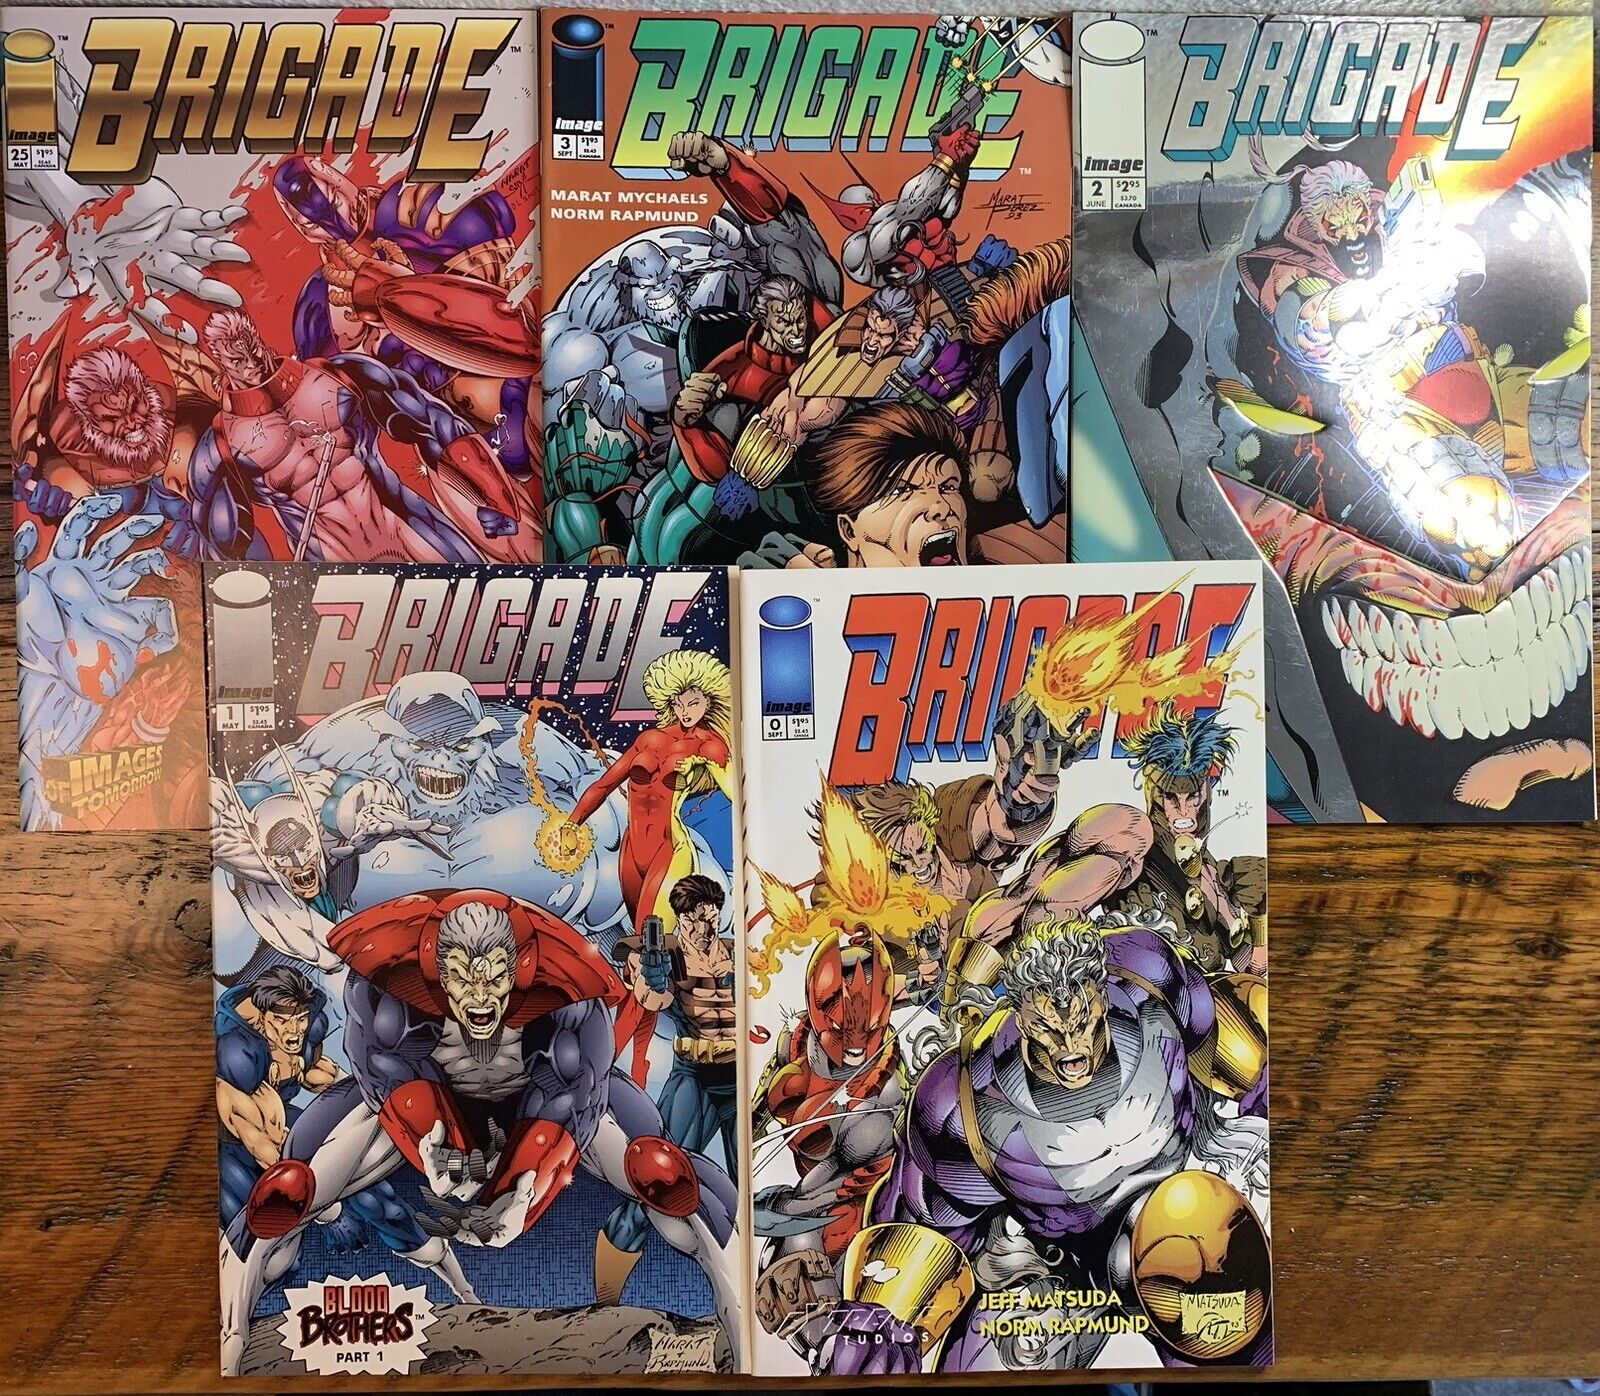 Brigade Comic Lot #0 1 2 3 25 NM (5 Books) Image 1993 Final Issue Rob Liefeld